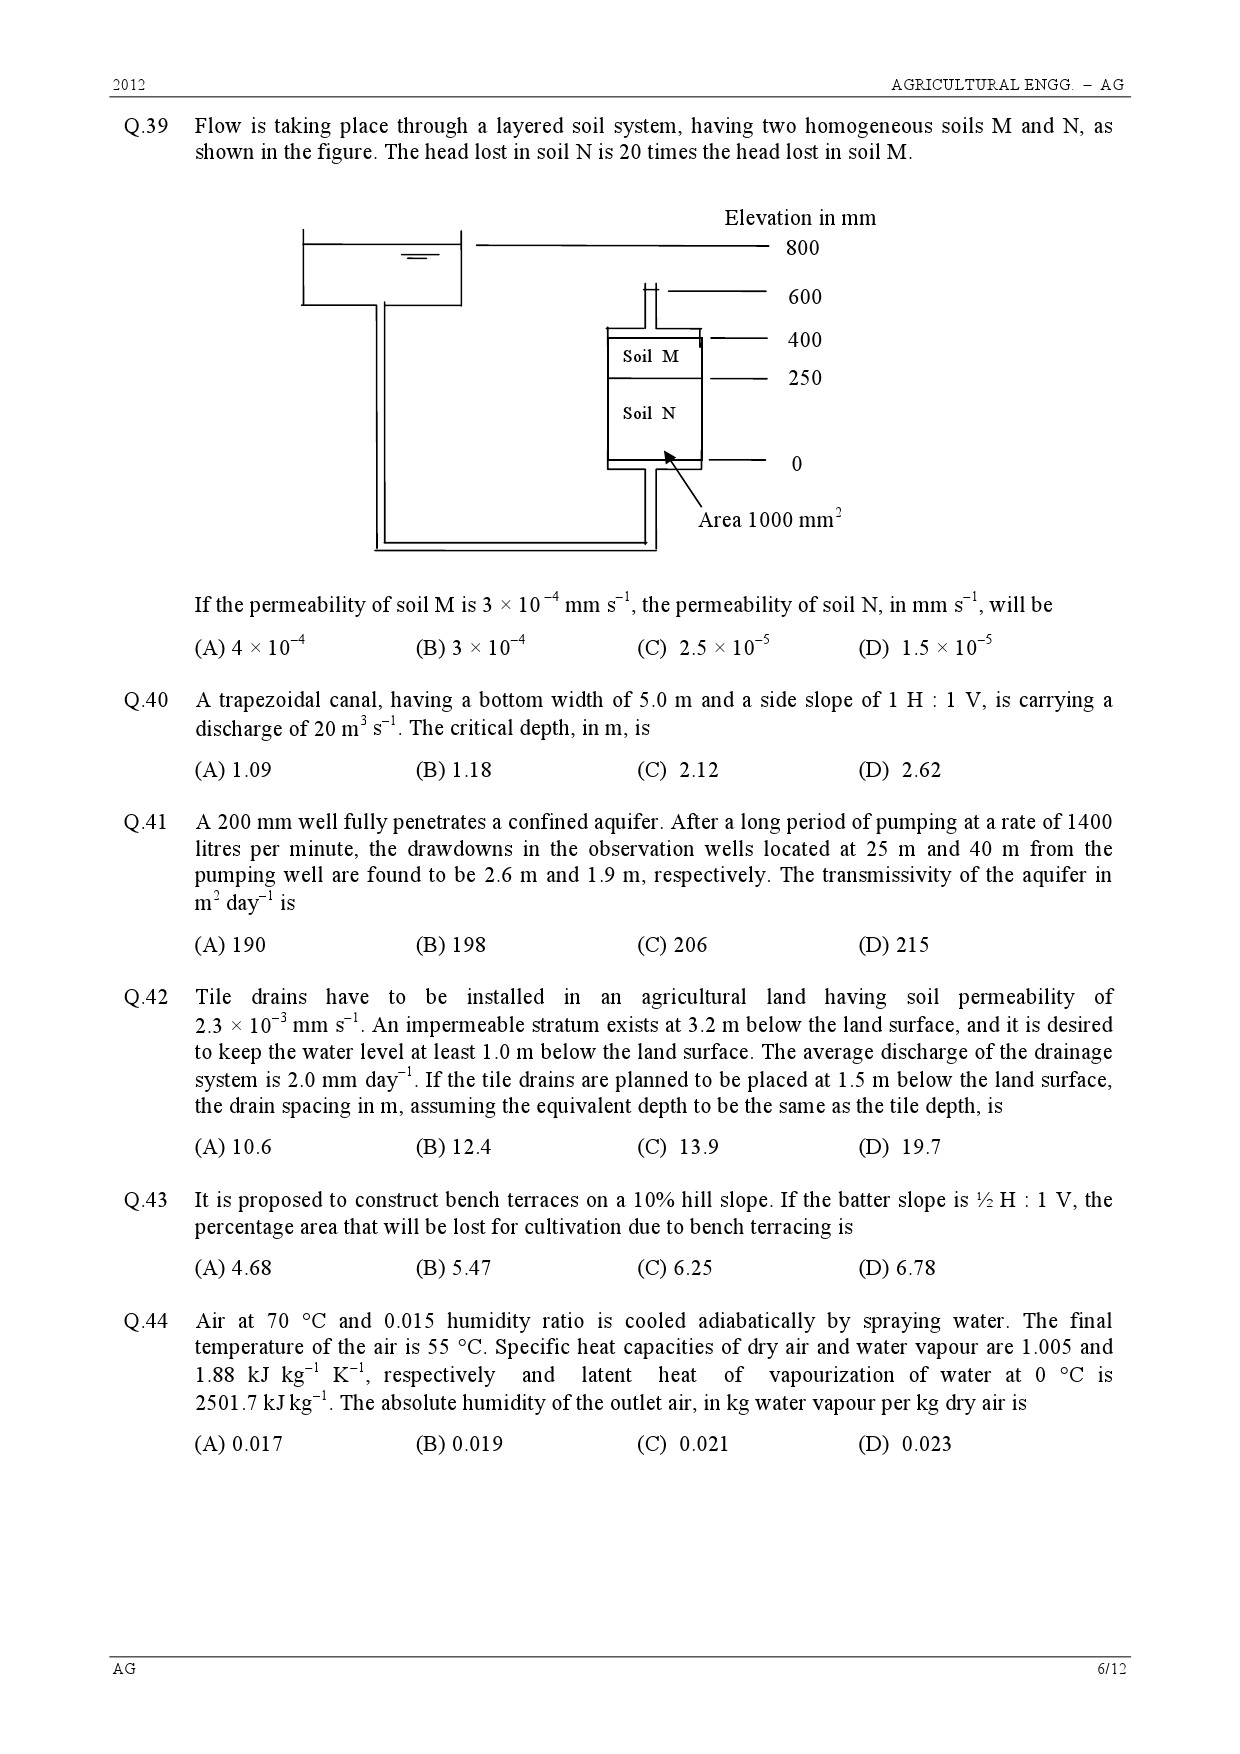 GATE Exam Question Paper 2012 Agricultural Engineering 6